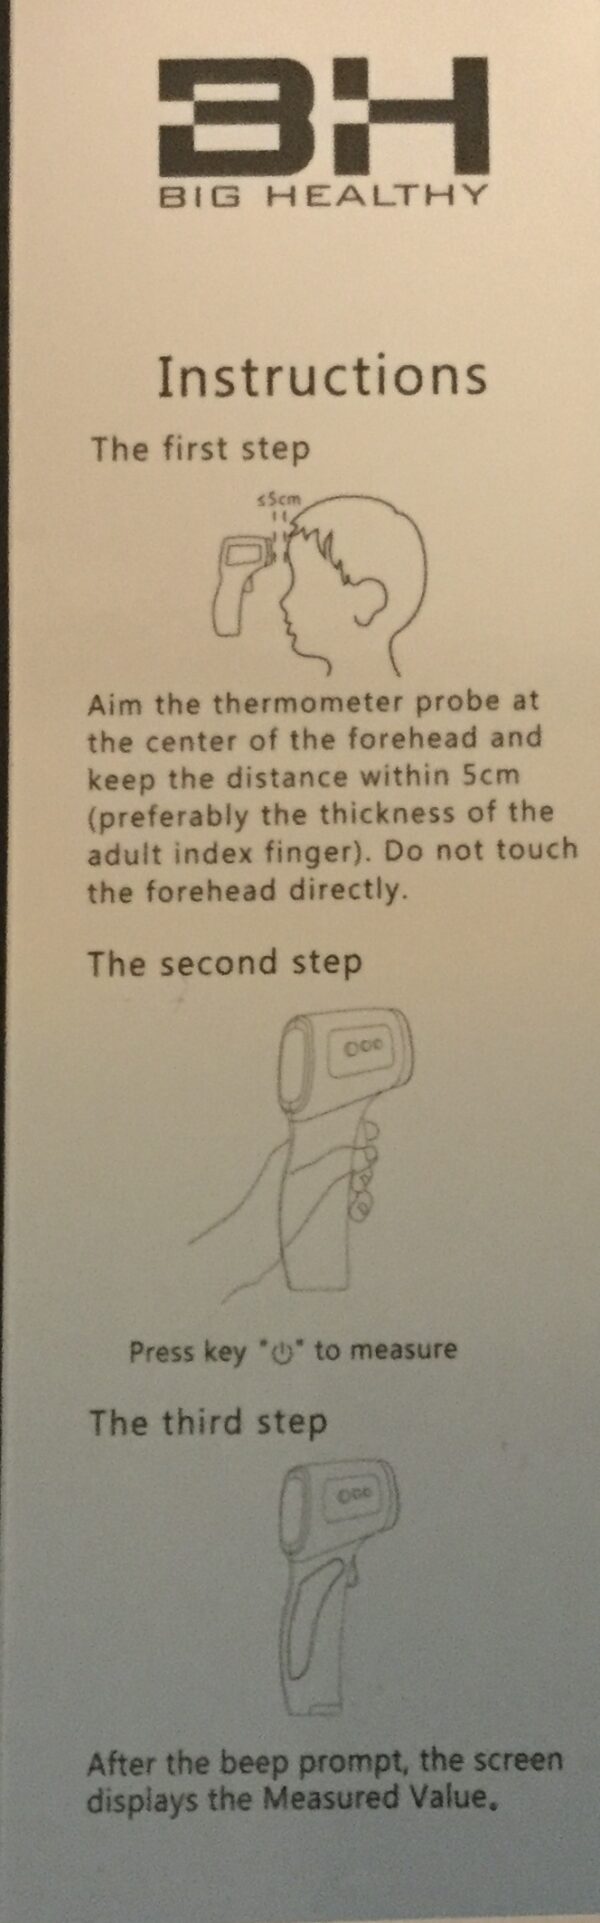 Instruction manual with illustrations showing how to use an Infrared Touch Free Thermometer: placement in mouth, ear, and displaying measured value. Text includes step-by-step guidance.